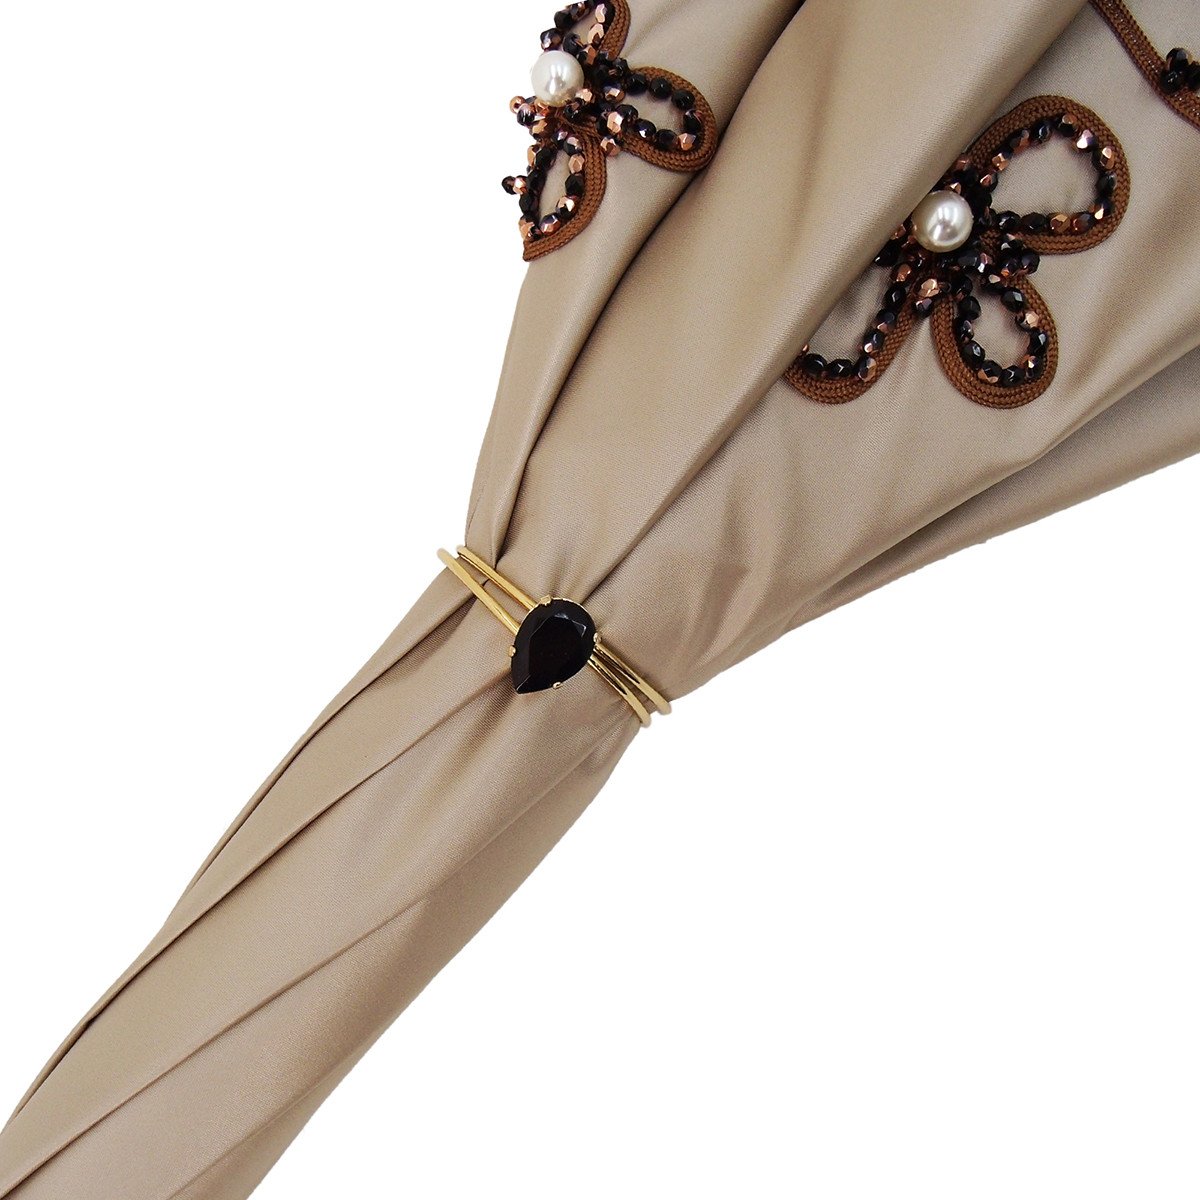 Embroidery Ivory Umbrella - Jewel with Hand Sewn Pearls - Double Cloth - il-marchesato